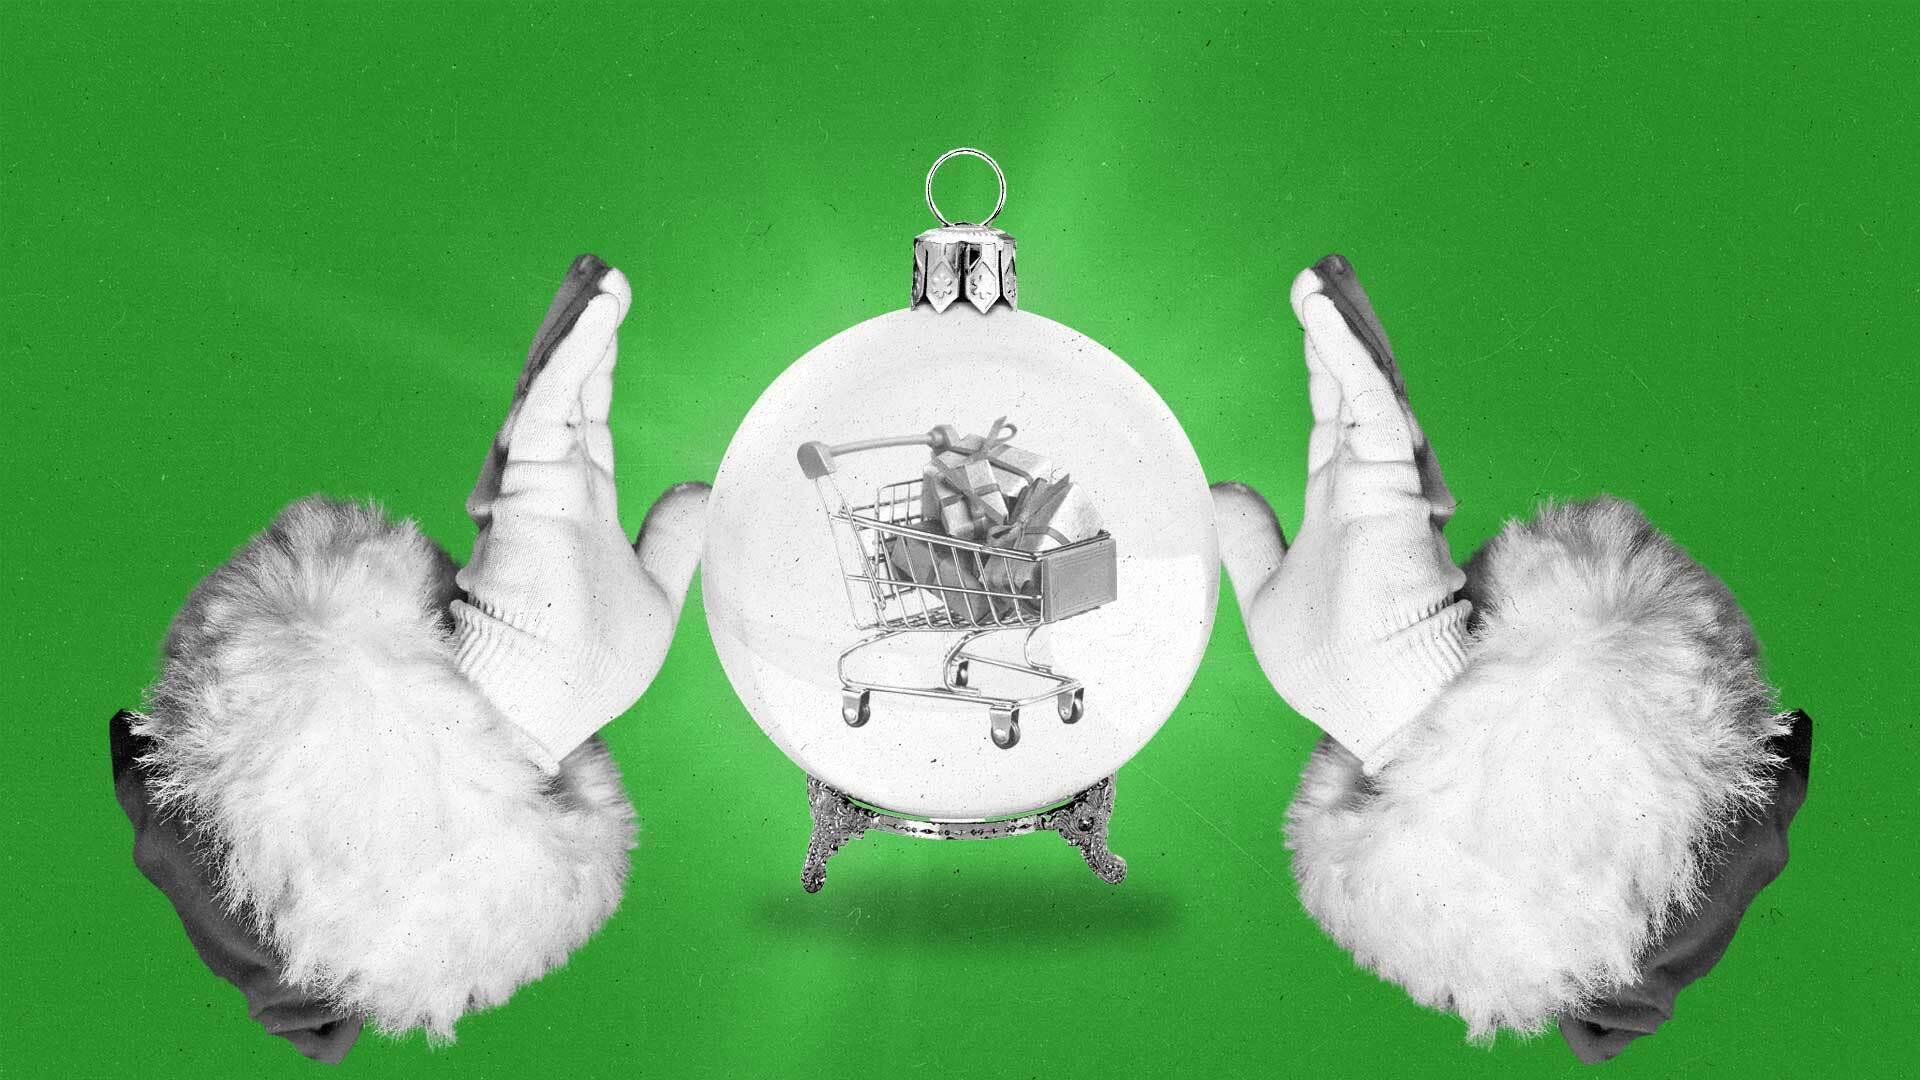 Two gloved hands with puffy sleeves hover around a glowing glass ornament crystal ball with a shopping cart inside.